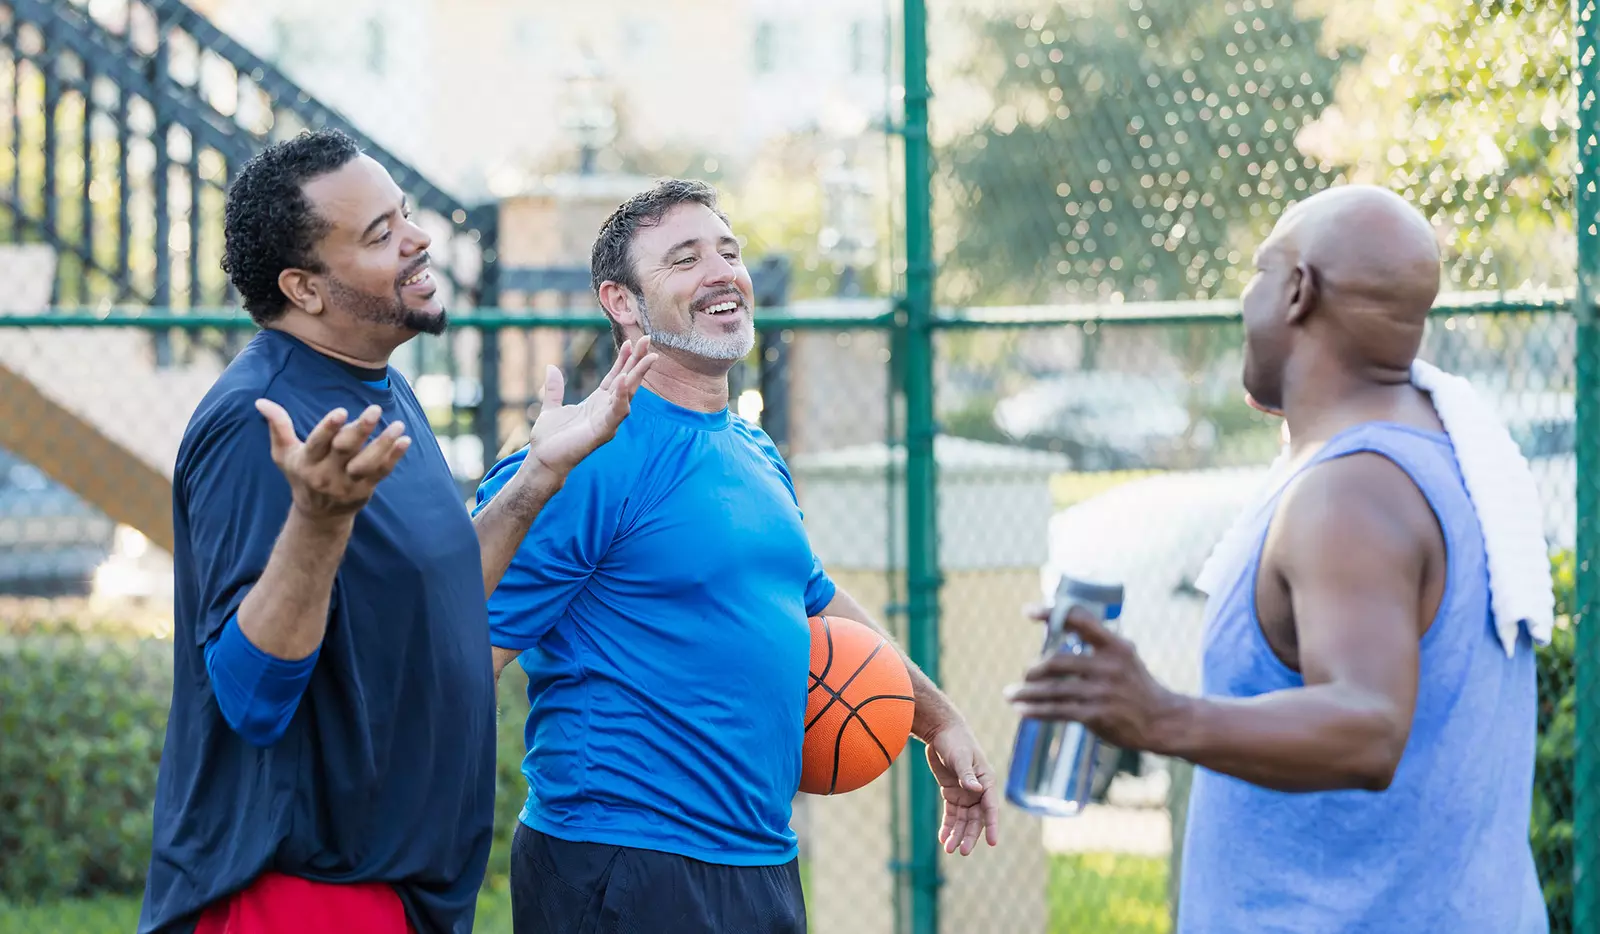 A group of older men talking and taking a break after a round of basketball